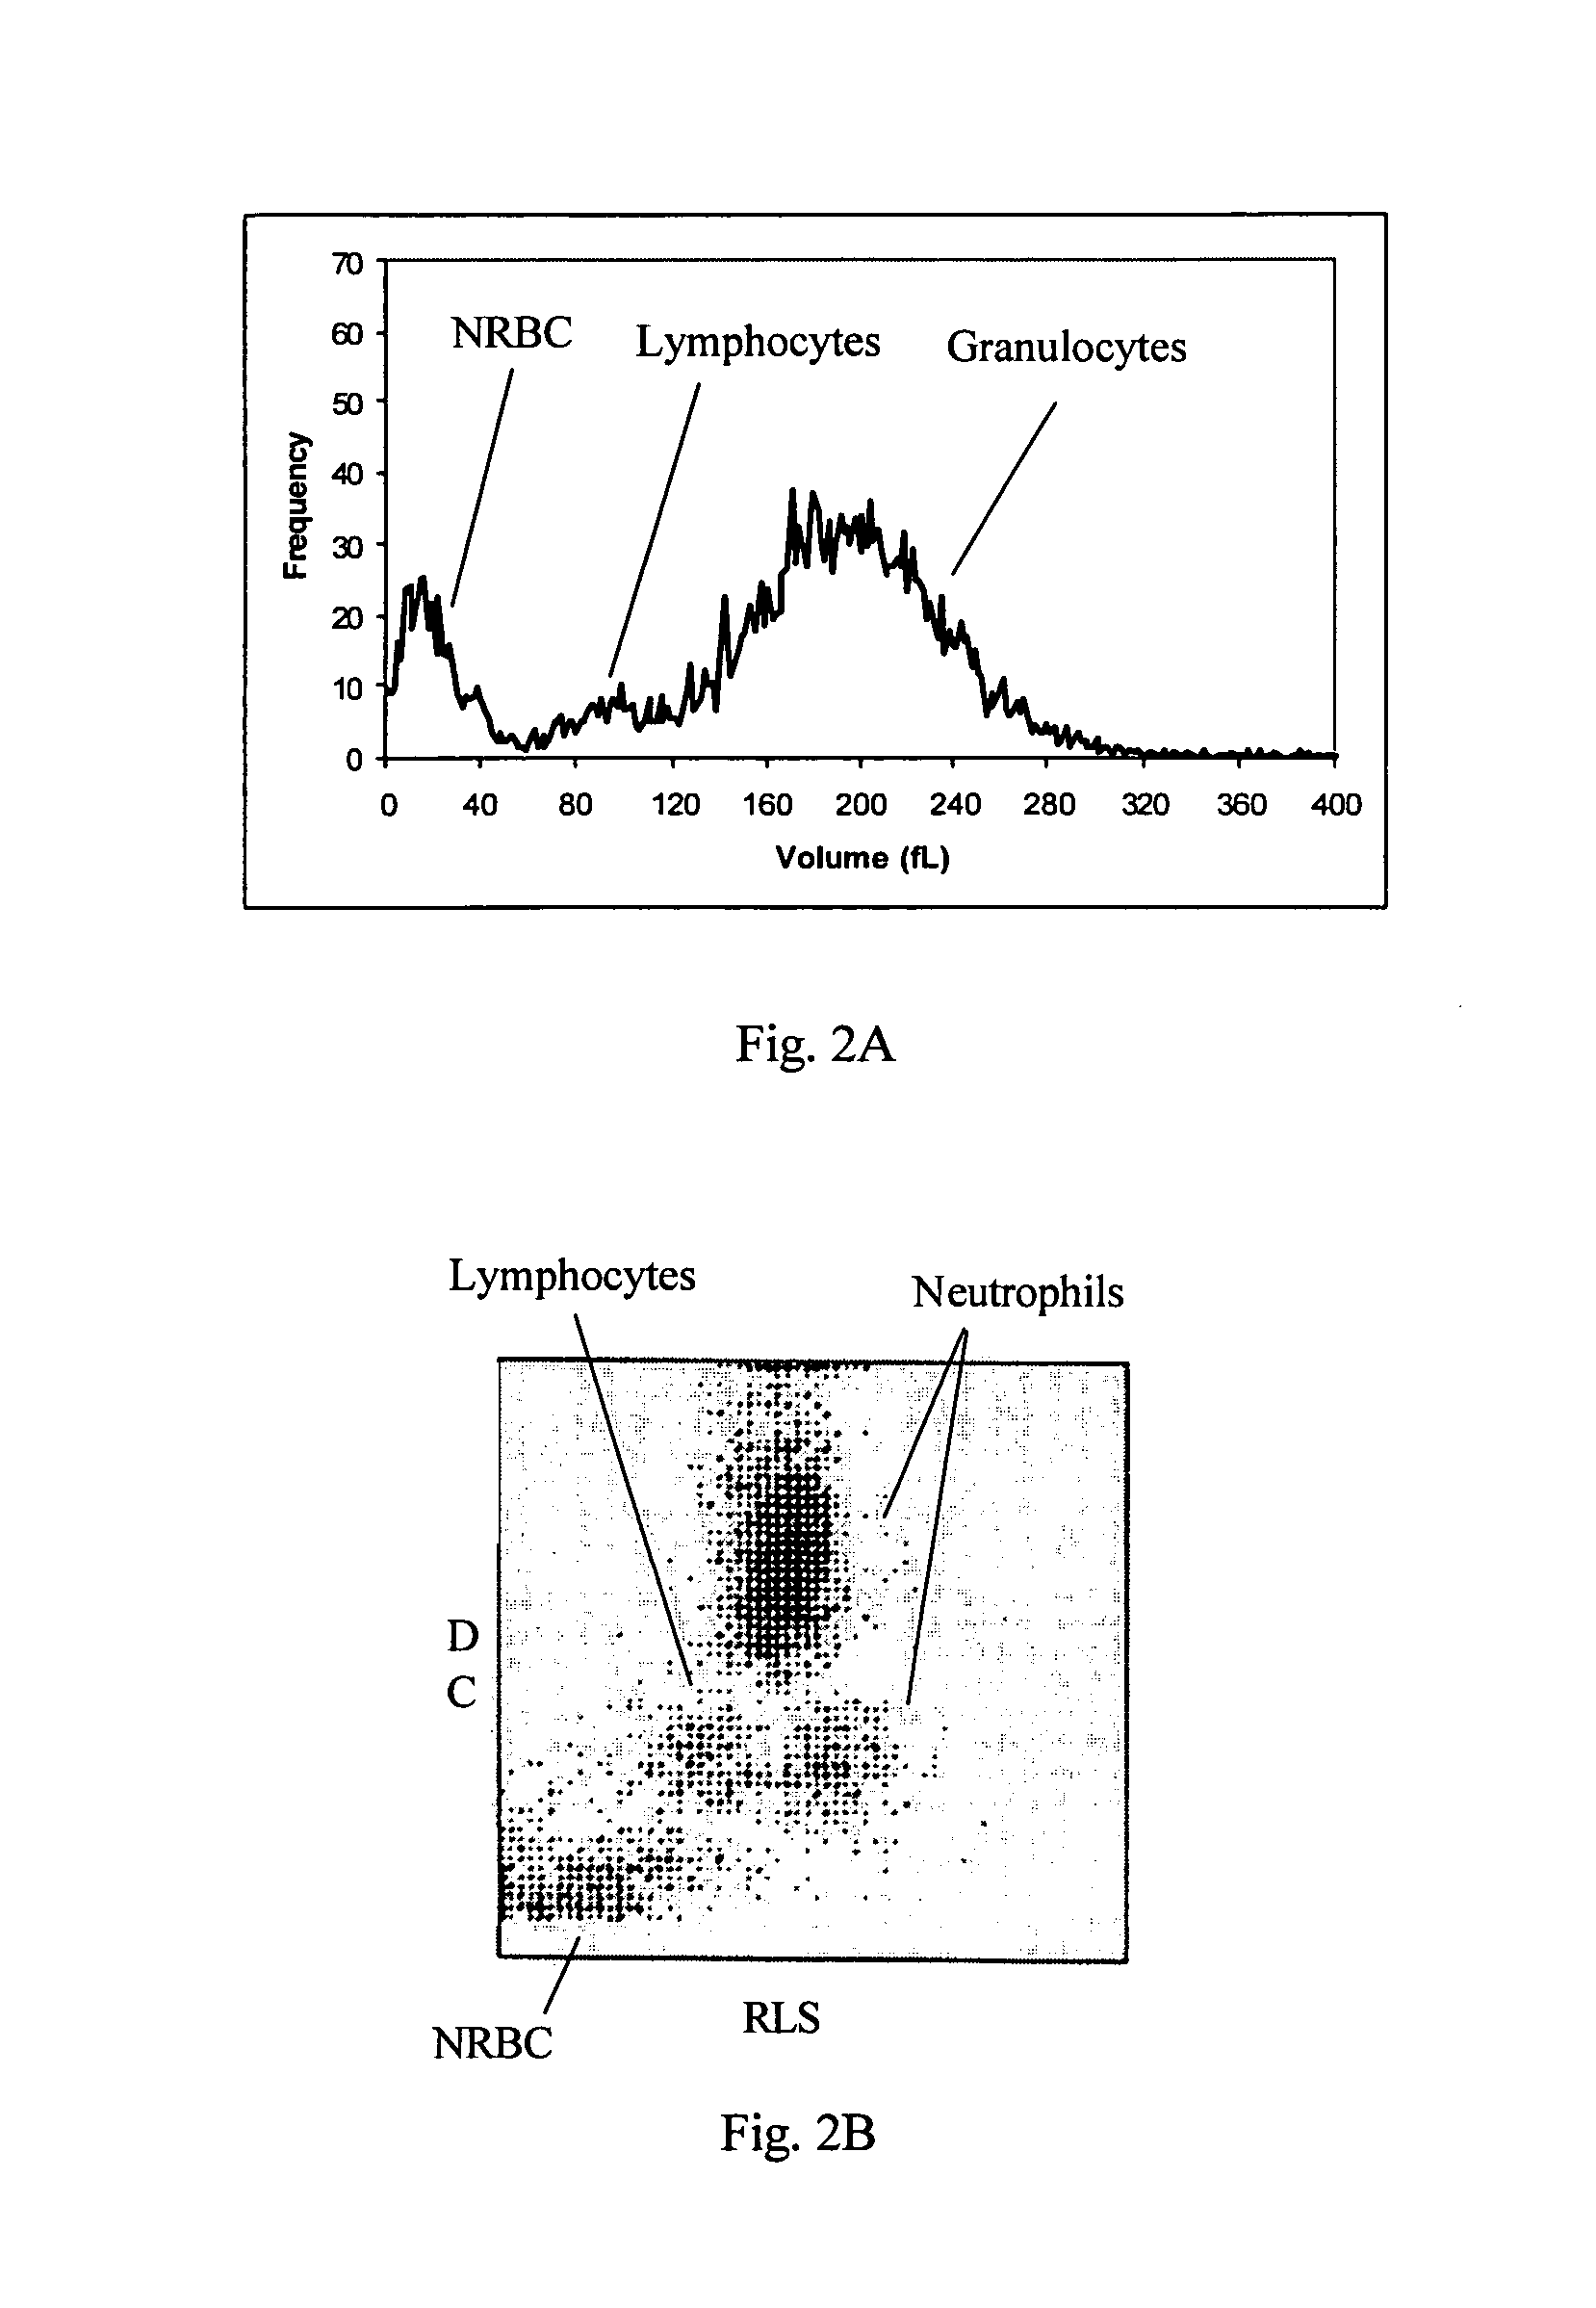 Reference control composition containing a nucleated red blood cell component made of non-nucleated blood cells